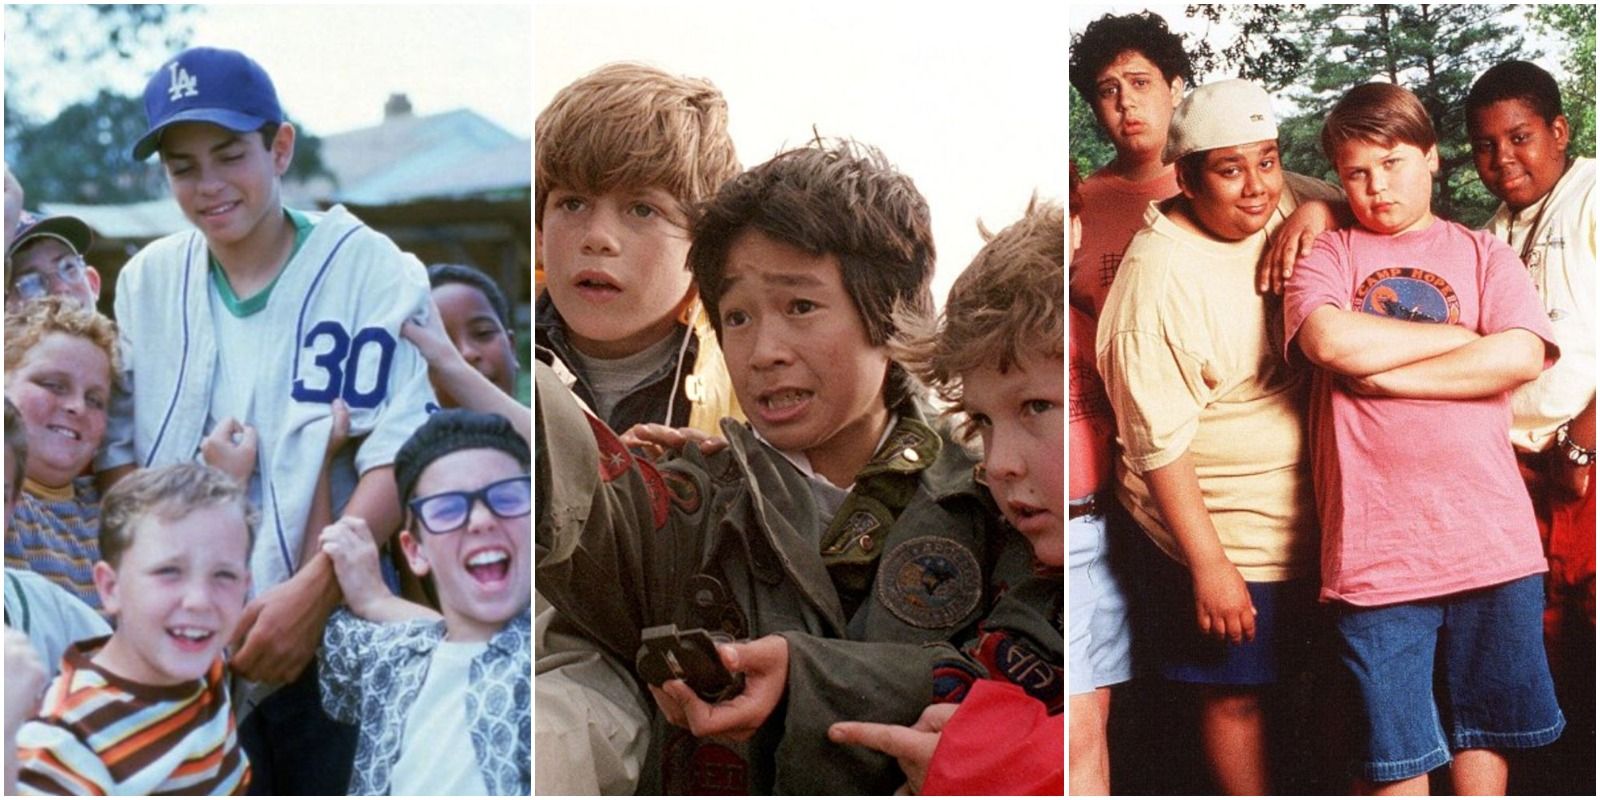 The Goonies & 9 Other Sentimental Movies About Childhood Friend Groups